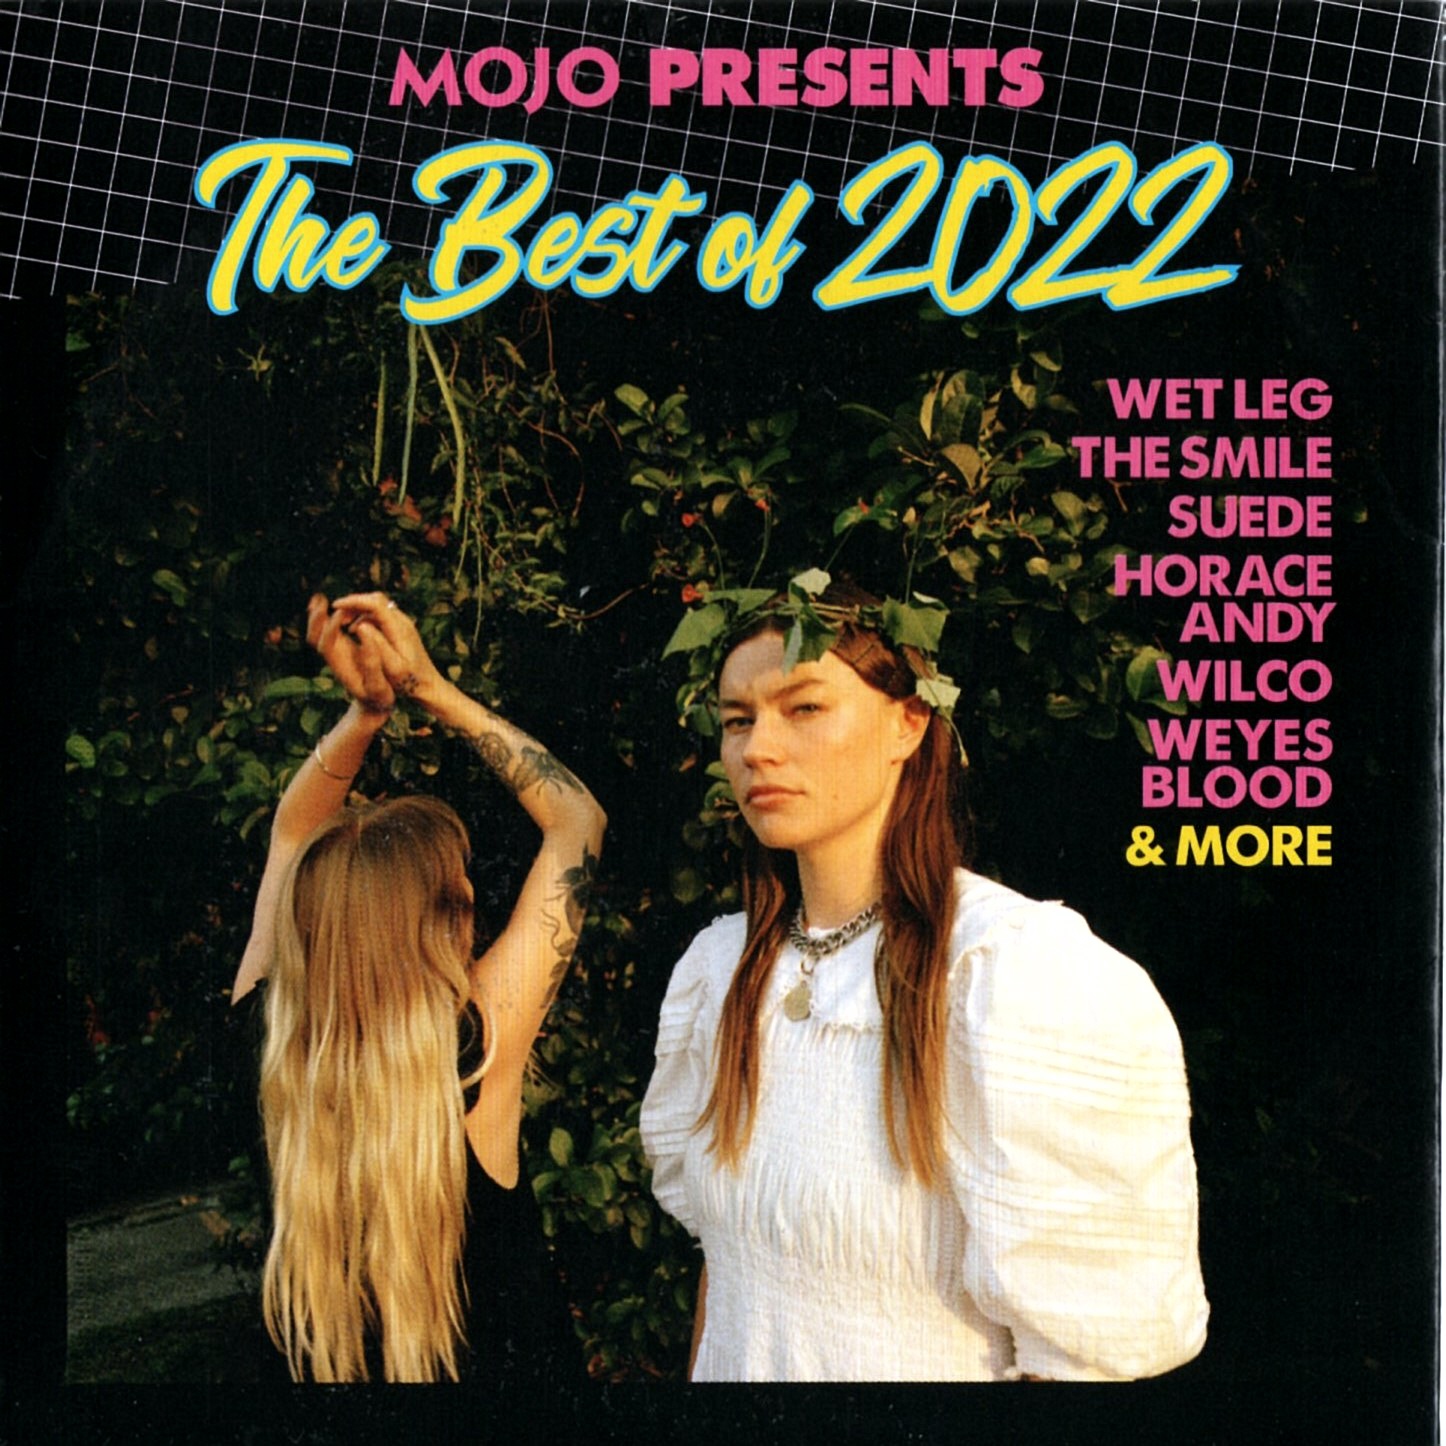 Mojo Presents-the best of 2022(2022)by Sir Cedrik